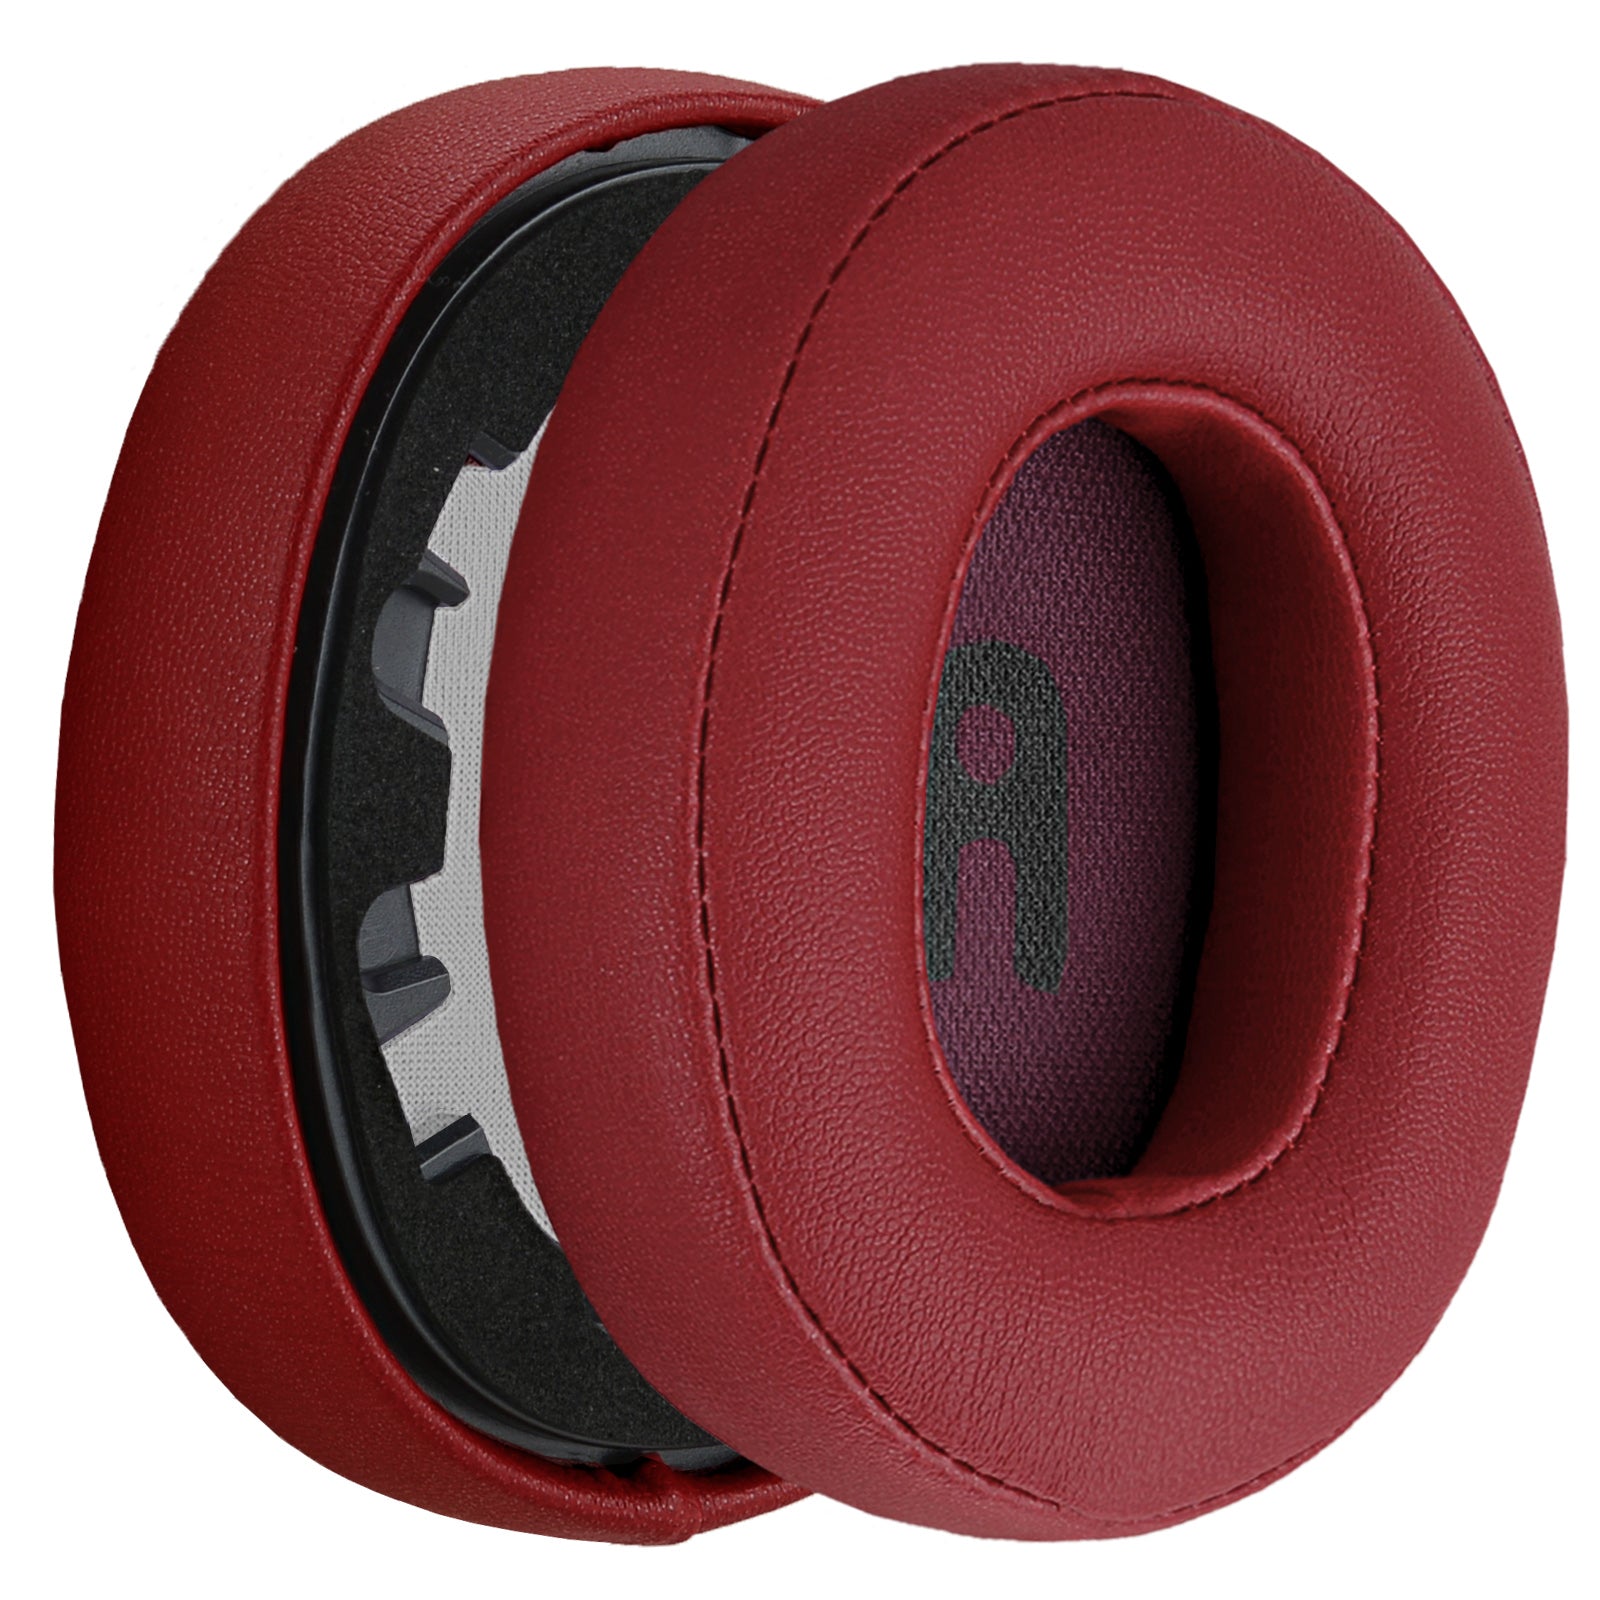 Replacement Leather Earpads Ear Pads Cushion Cover Muffs For JBL